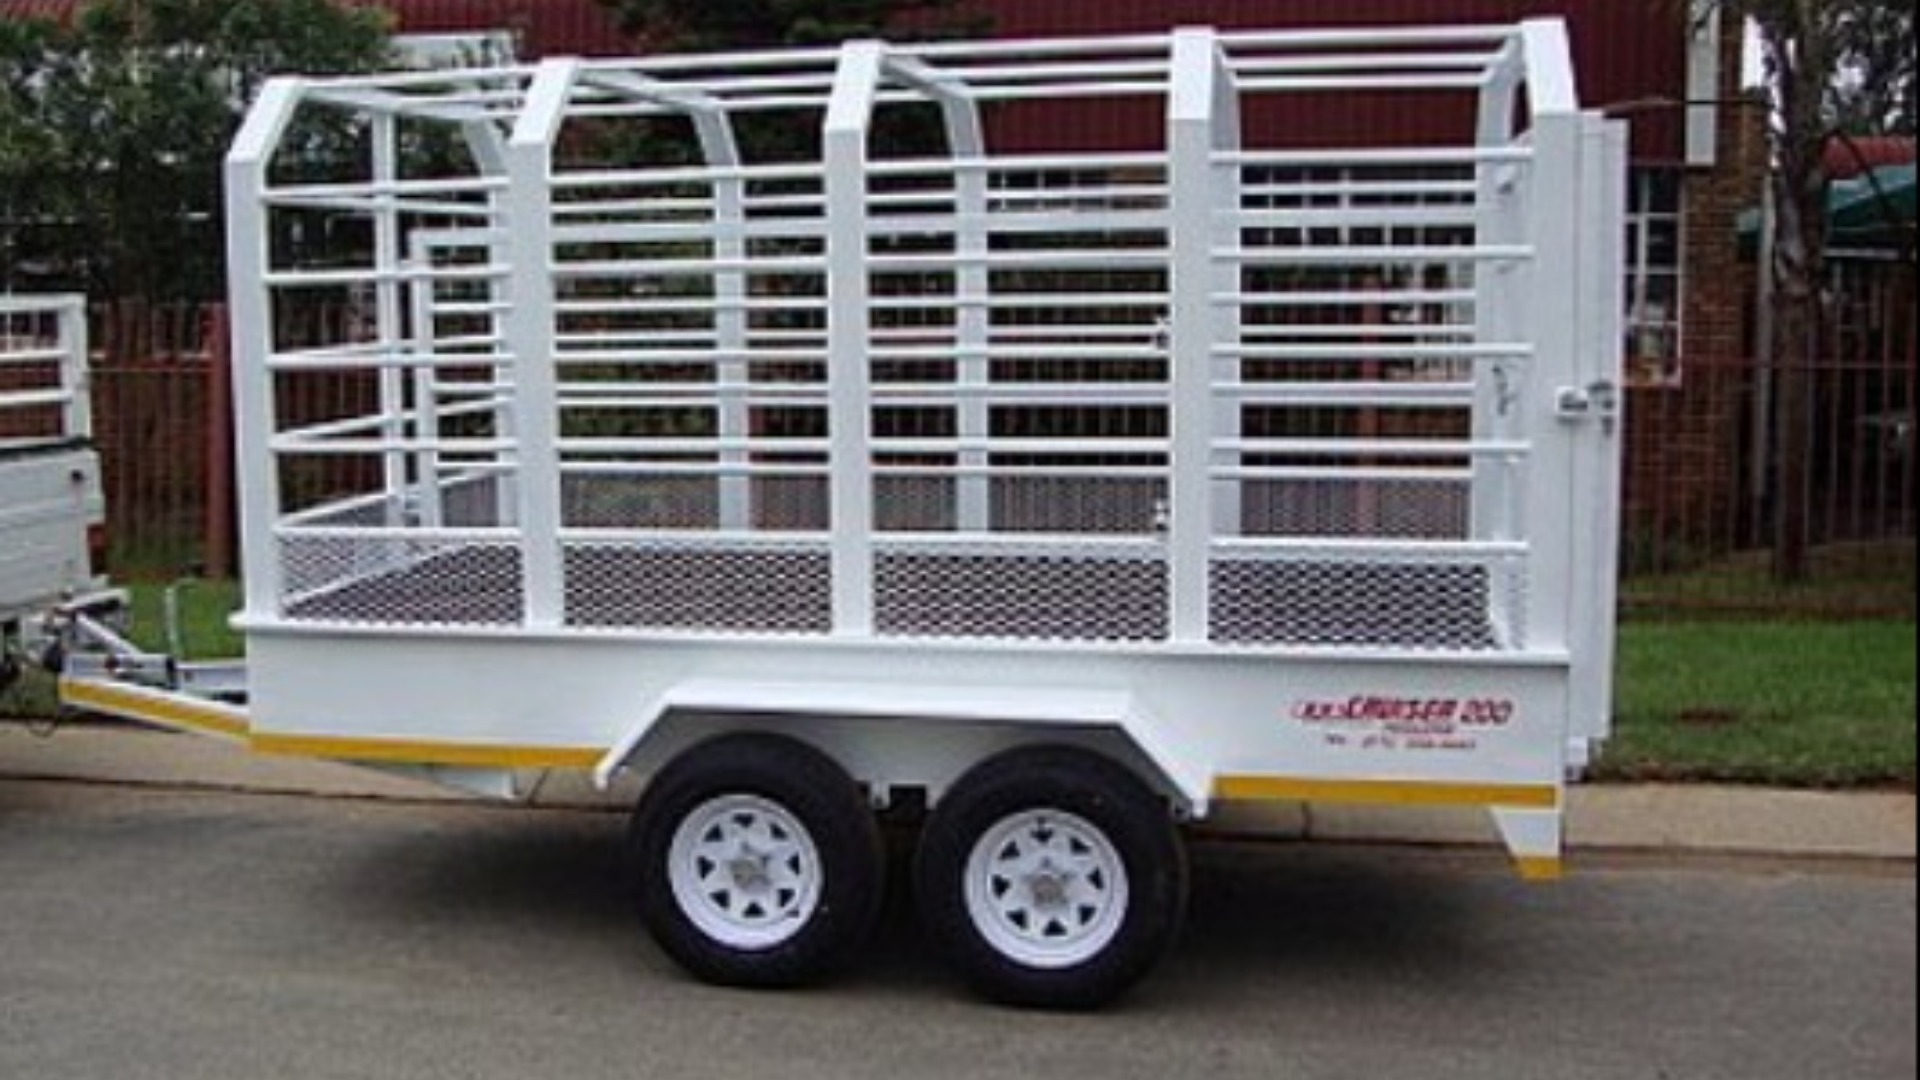 Custom Cattle trailer Cattle Trailers Available In Various Sizes KZN 2021 for sale by Jikelele Tankers and Trailers   | Truck & Trailer Marketplaces